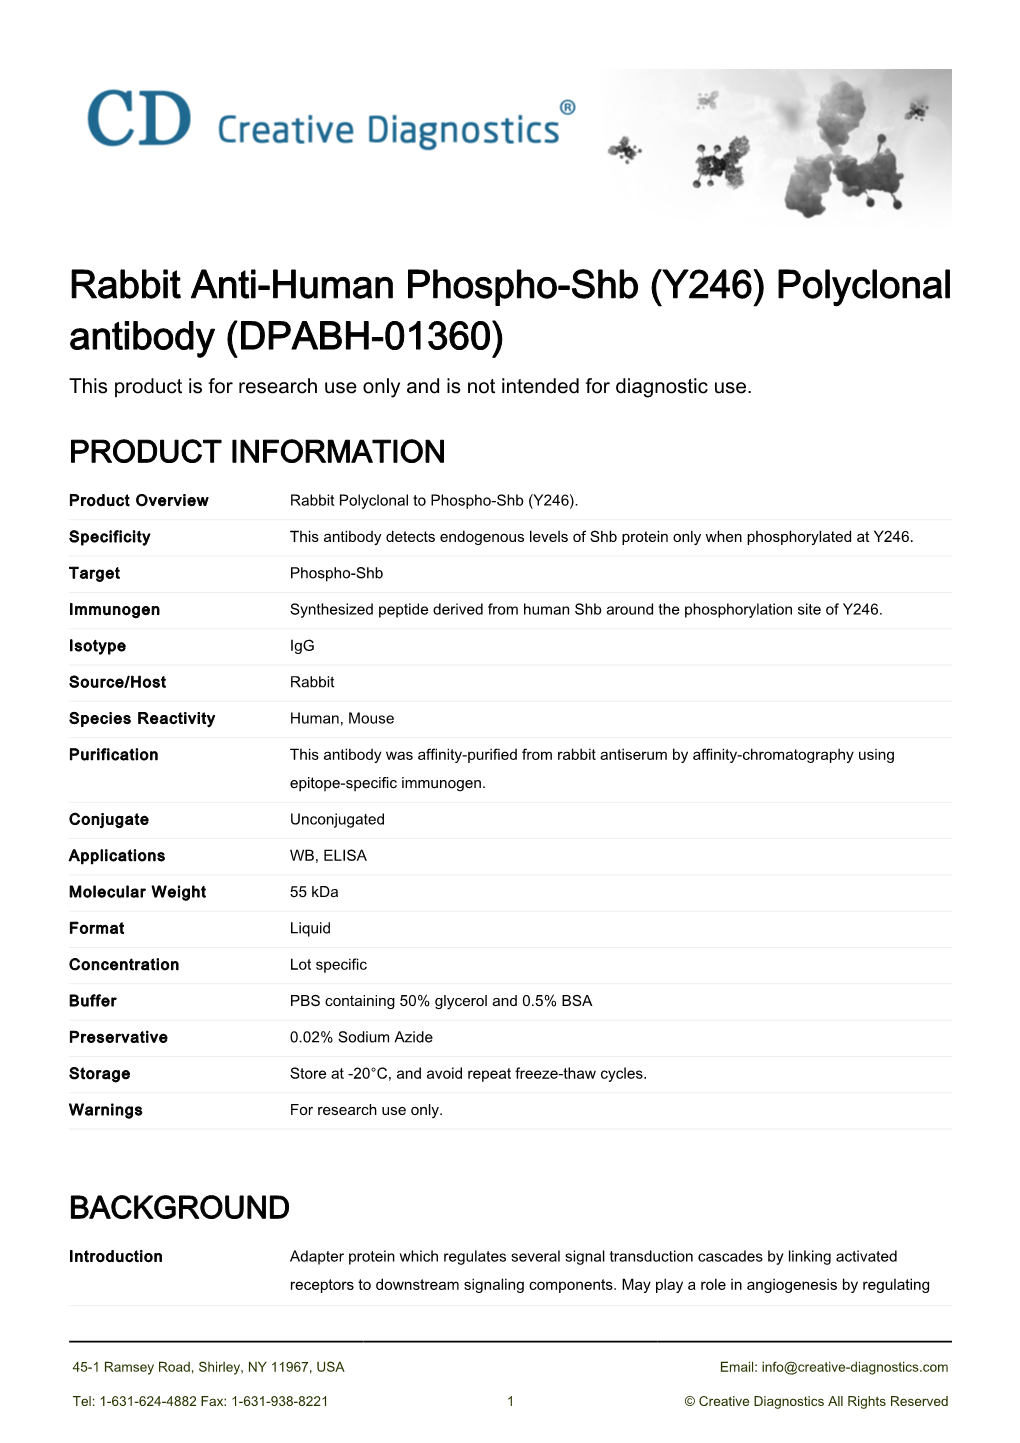 Rabbit Anti-Human Phospho-Shb (Y246) Polyclonal Antibody (DPABH-01360) This Product Is for Research Use Only and Is Not Intended for Diagnostic Use